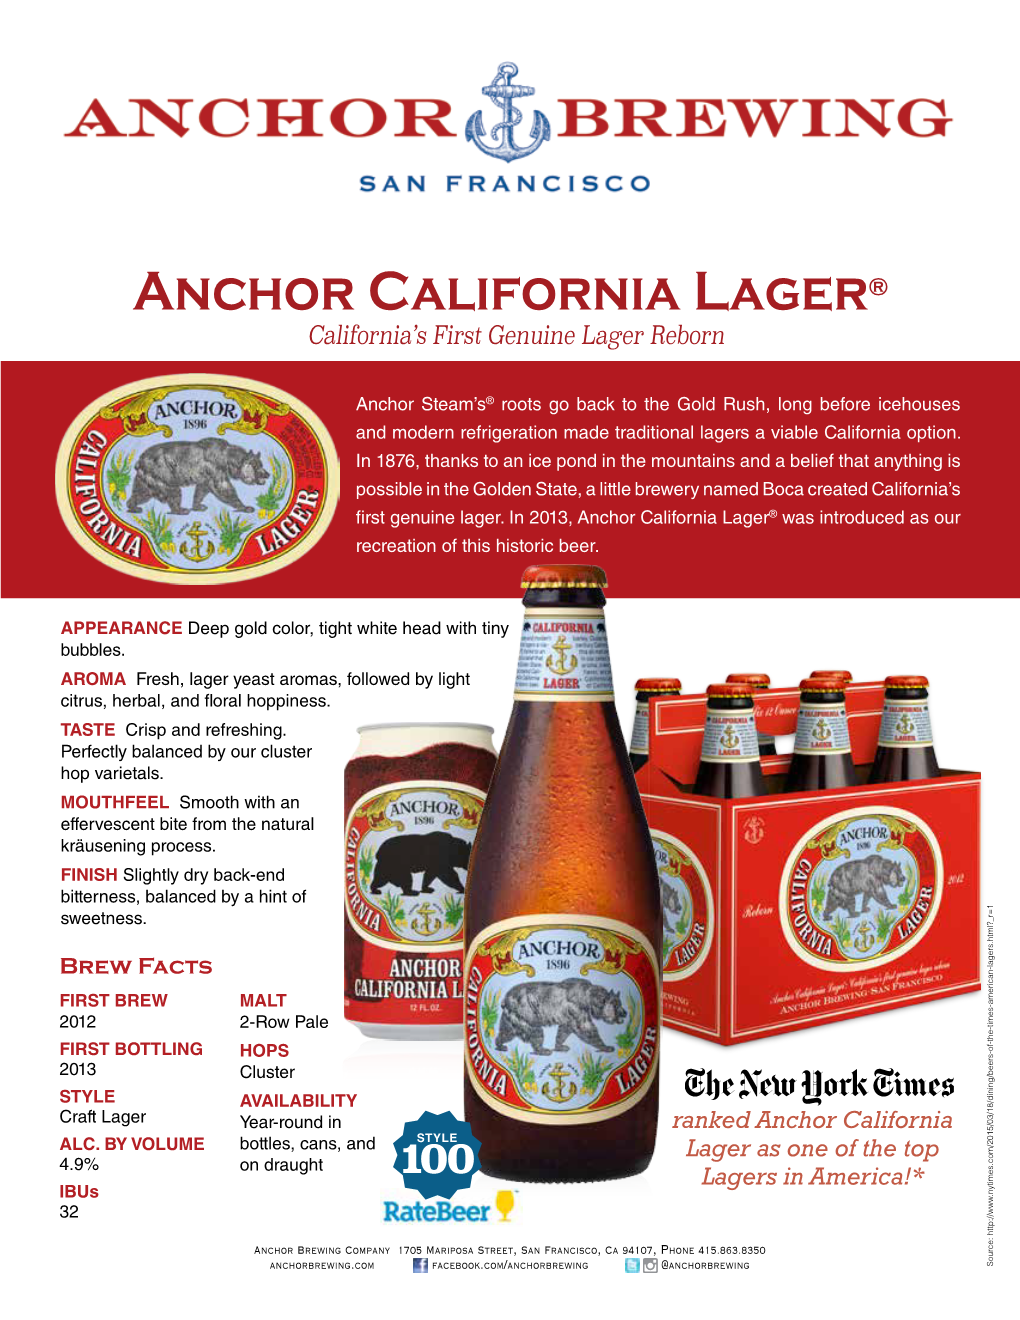 Anchor California Lager® California’S First Genuine Lager Reborn